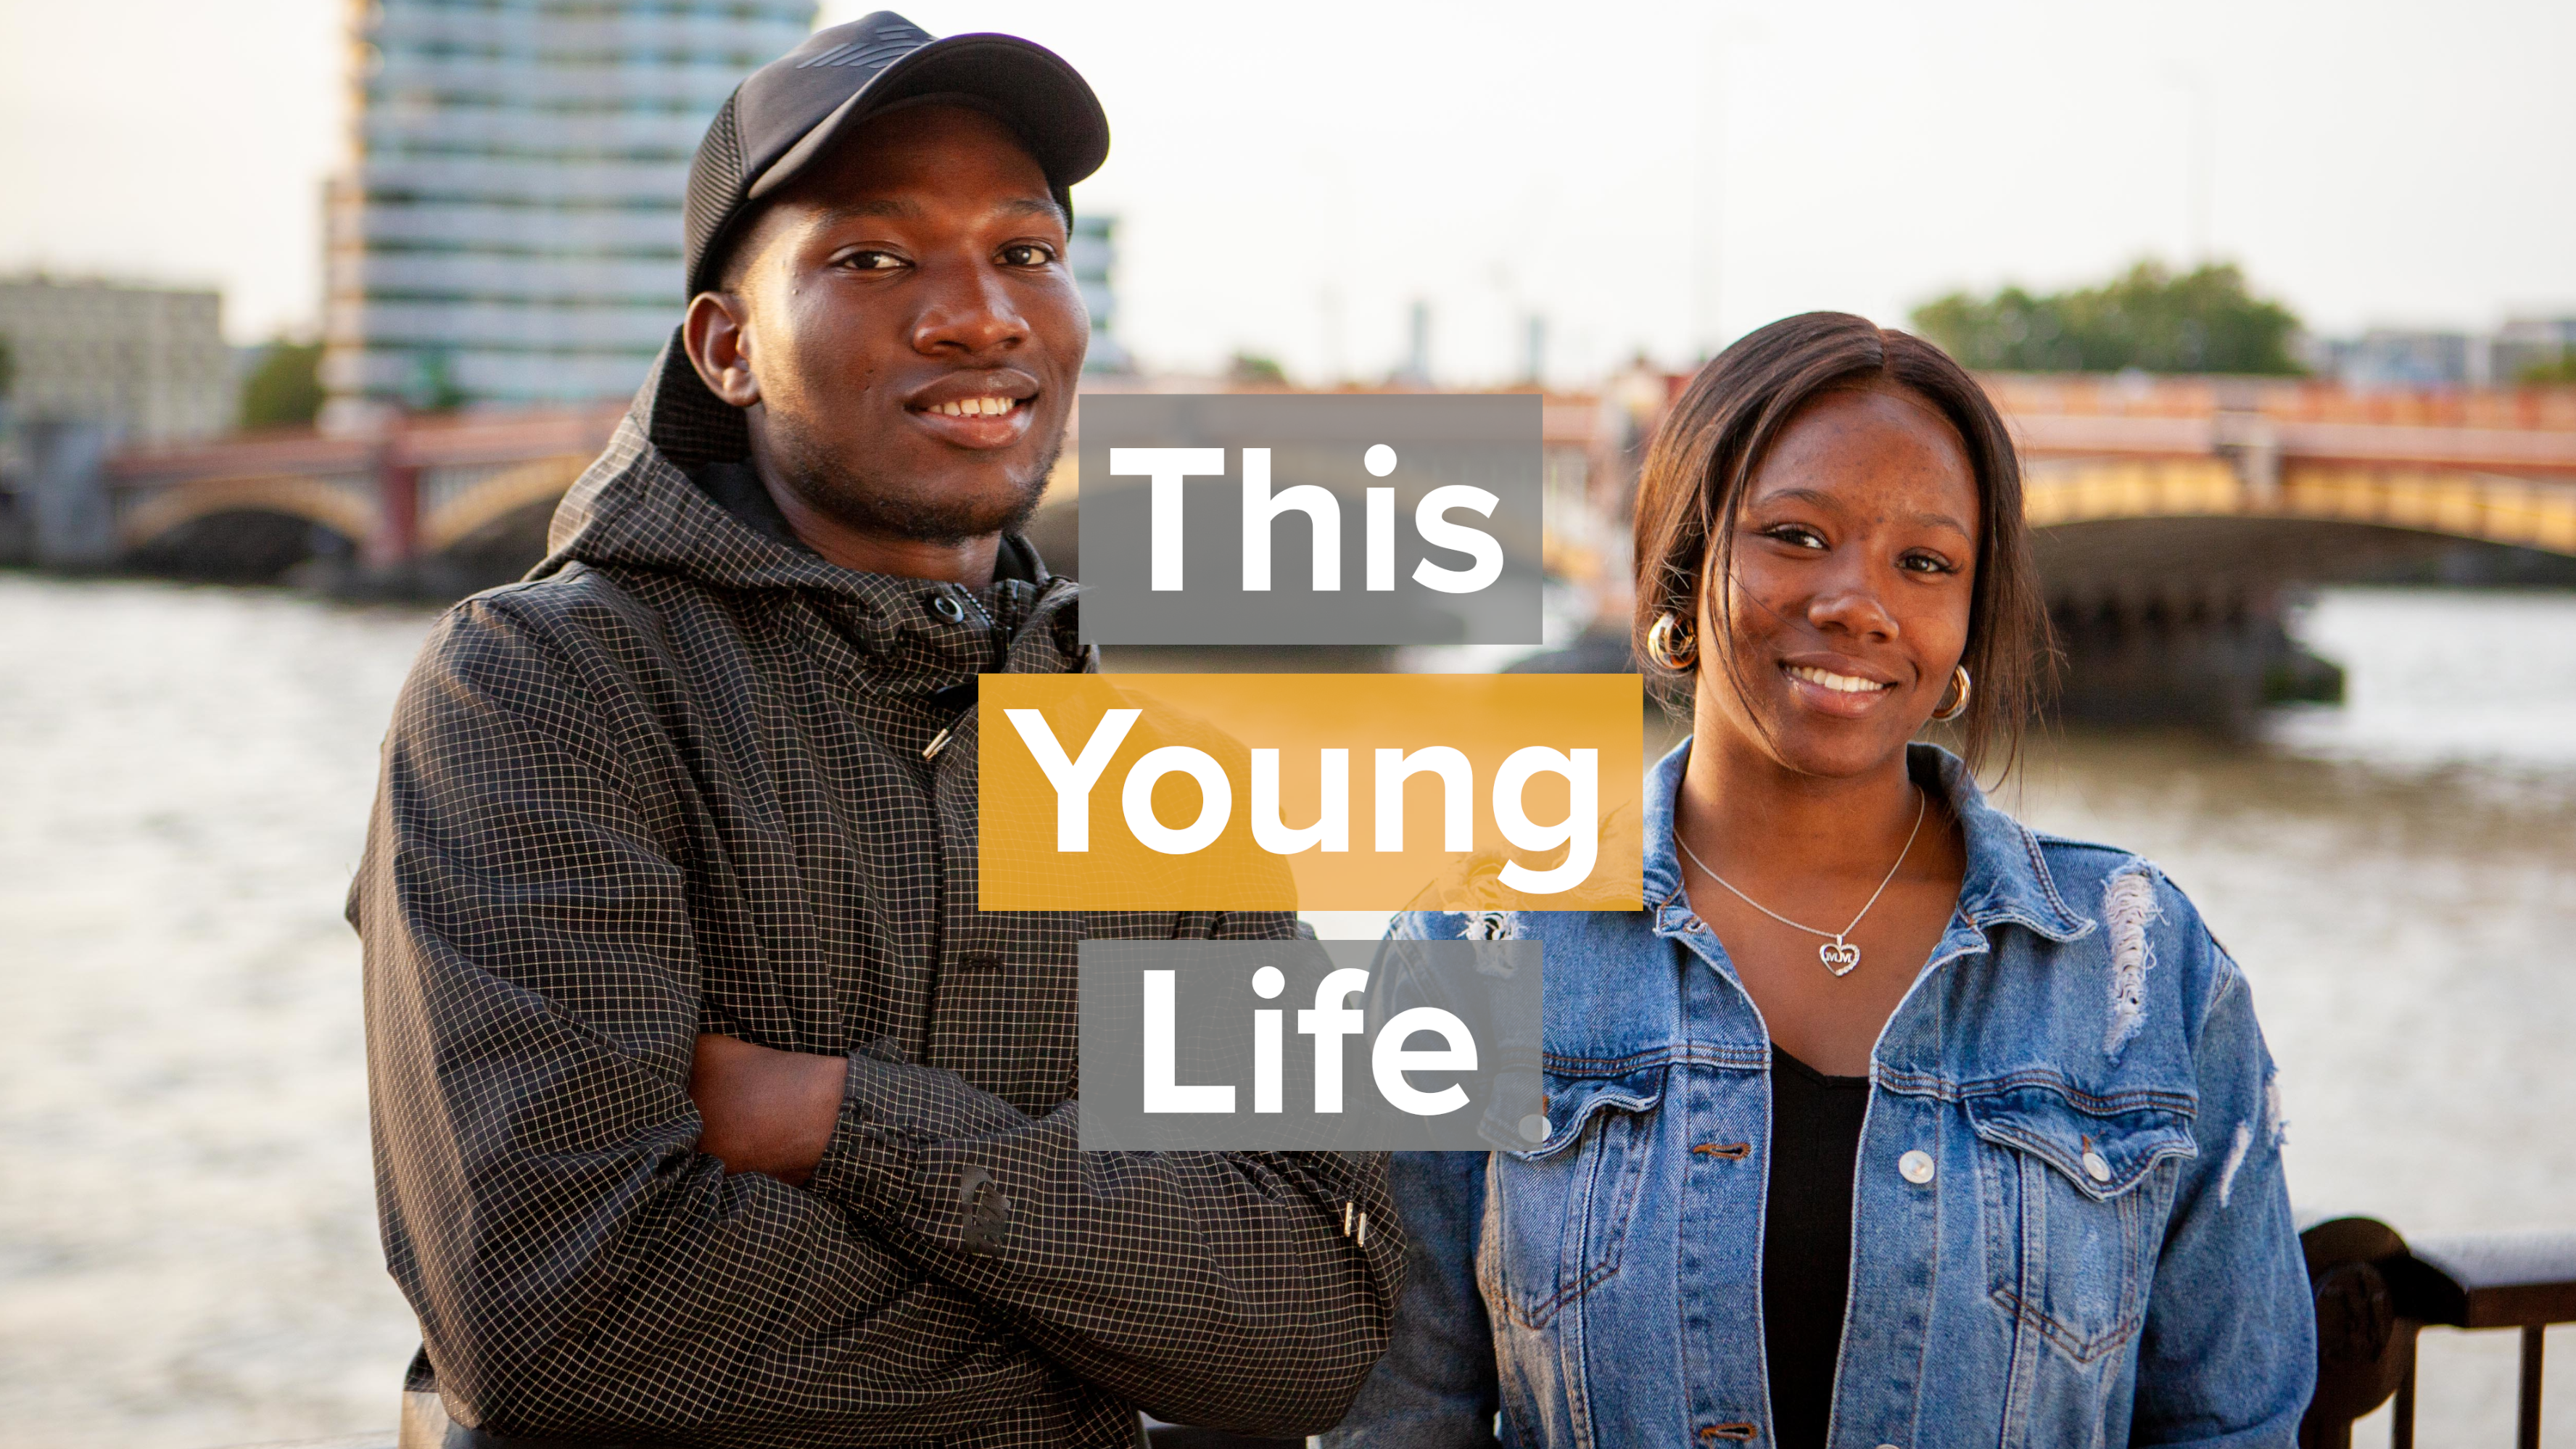 This Young Life is a new podcast from Just for Kids Law